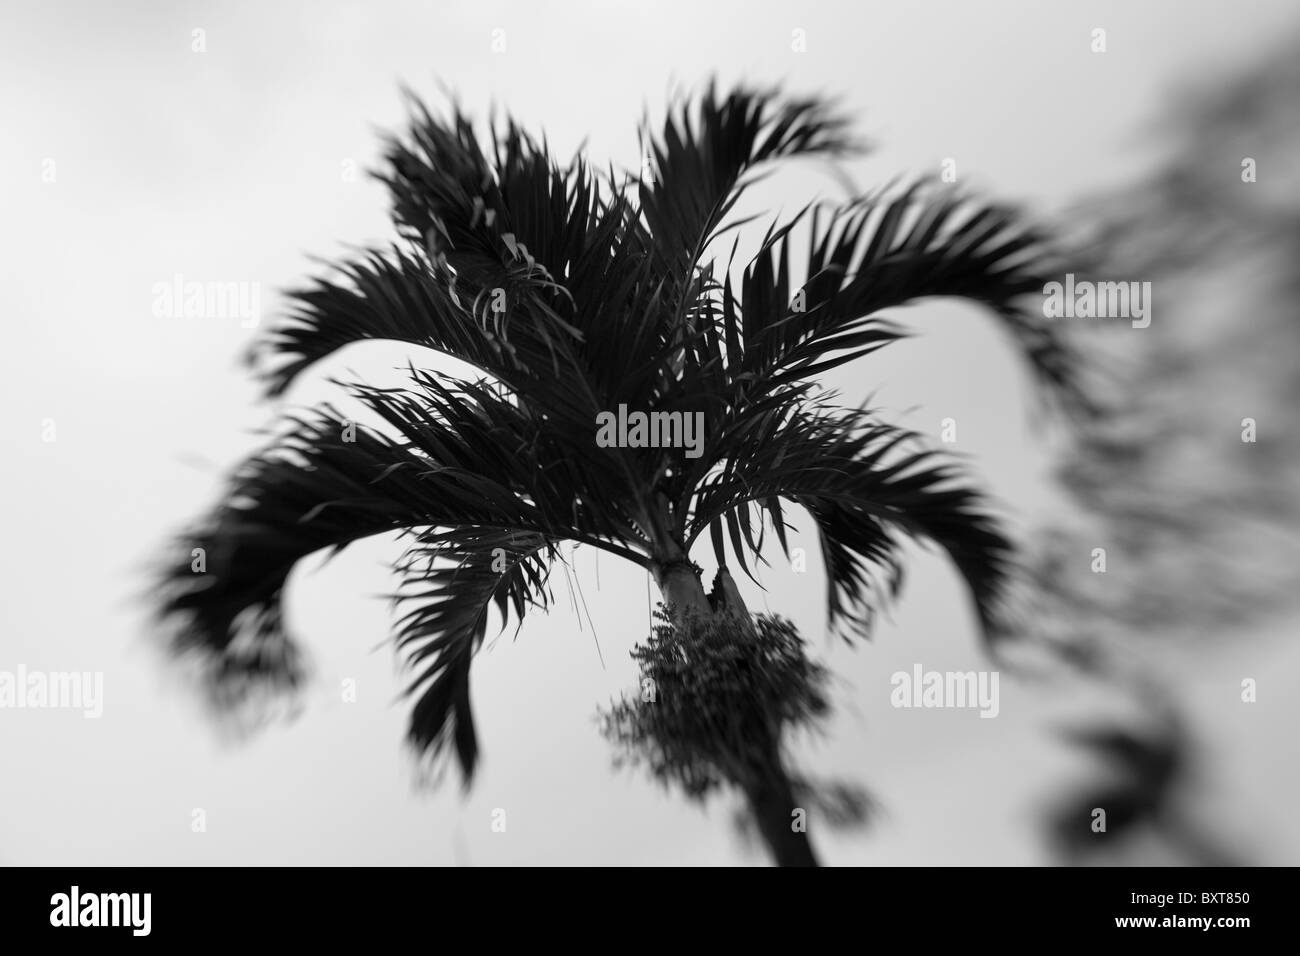 Costa Rica, Alajuela, Blurred image of palm tree on slopes of Poas Volcano Stock Photo